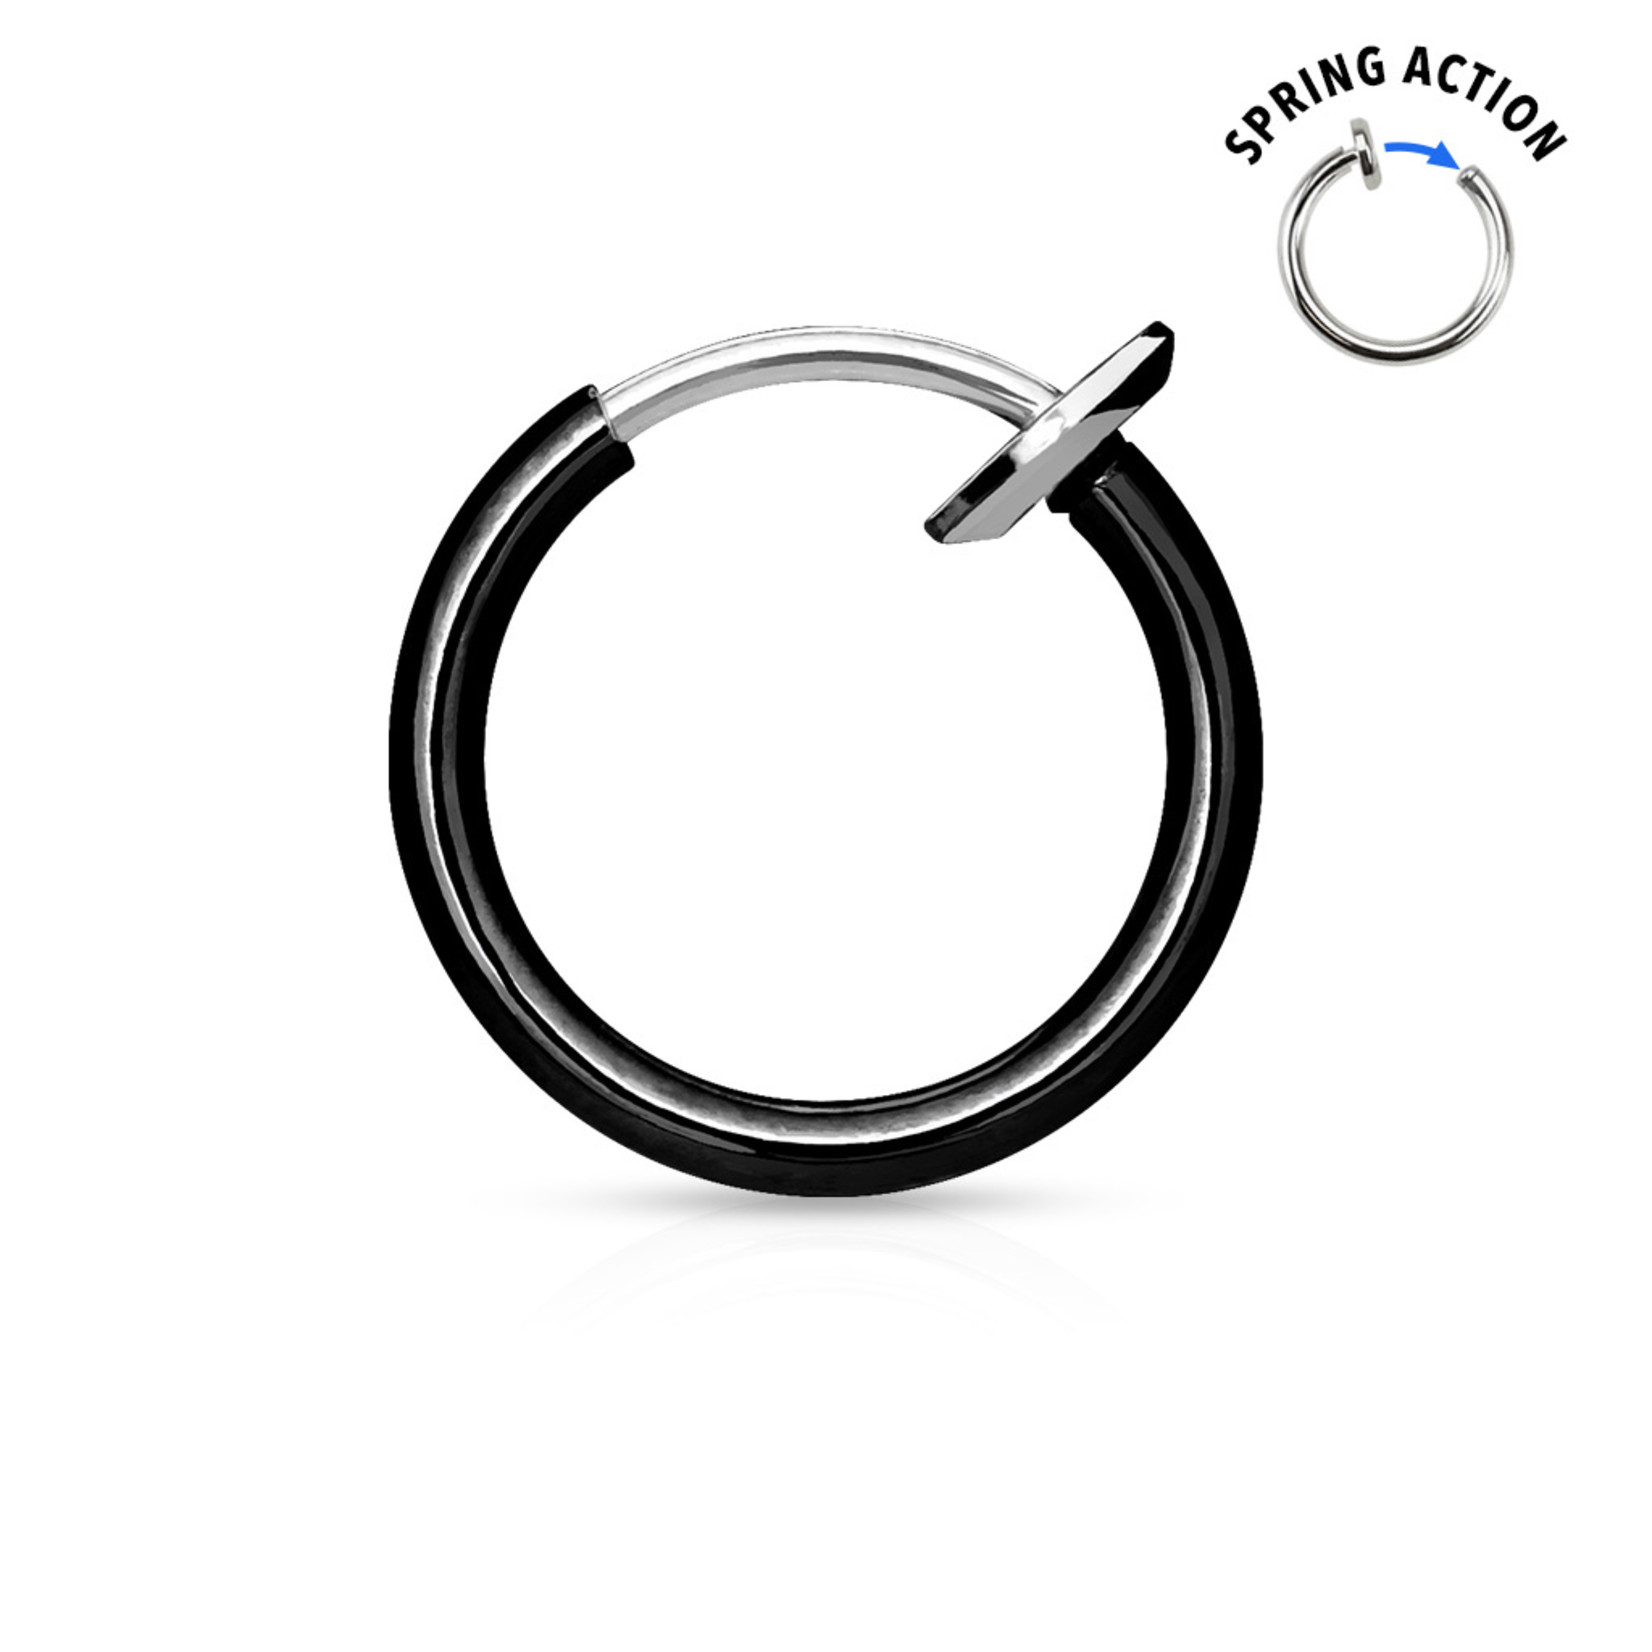 Hollywood Body Jewelry Spring Action Hoop